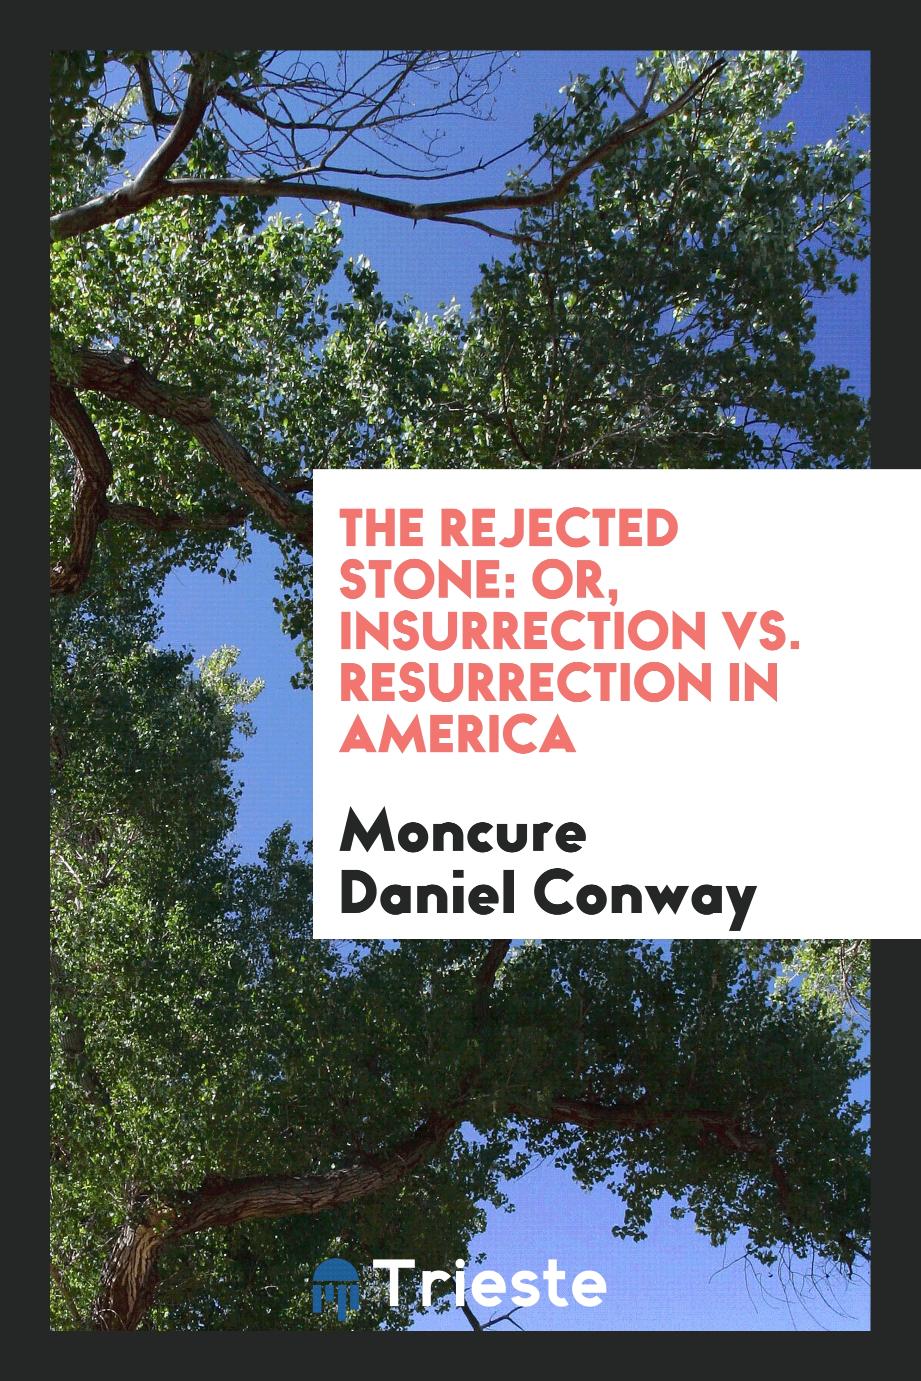 The Rejected Stone: Or, Insurrection vs. Resurrection in America